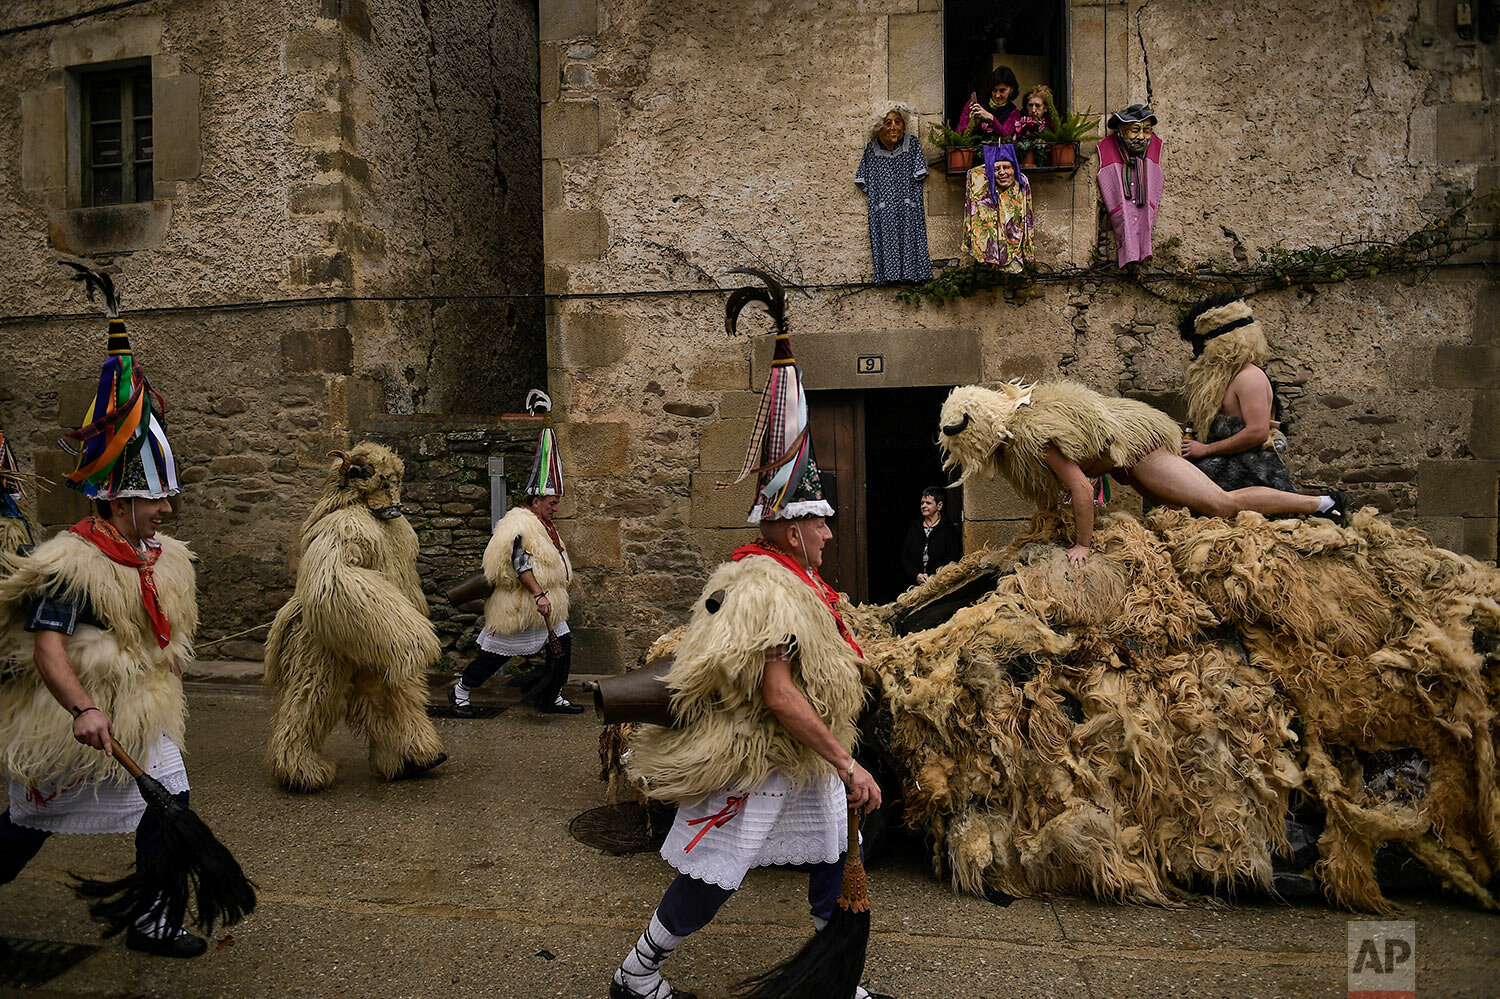  In this Monday, Jan. 27, 2020 photo, "Joaldunaks" march along the street as they take part in a Carnival in the small Pyrenees village of Ituren, northern Spain.  (AP Photo/Alvaro Barrientos) 